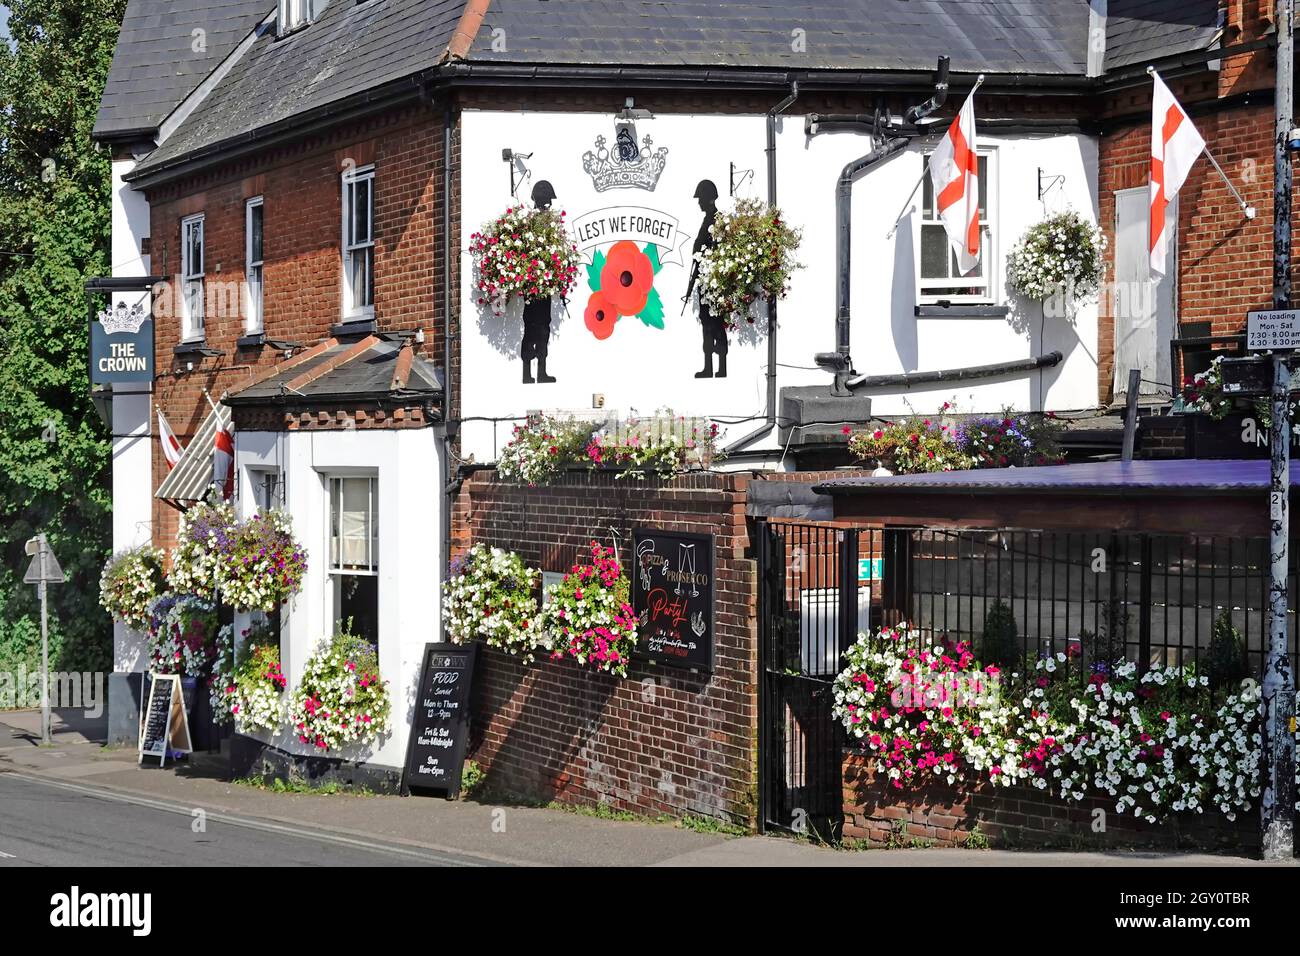 Summer hanging basket flower displays at The Crown public house with a Lest We Forget poppy & soldiers mural painted on wall high street Billericay UK Stock Photo